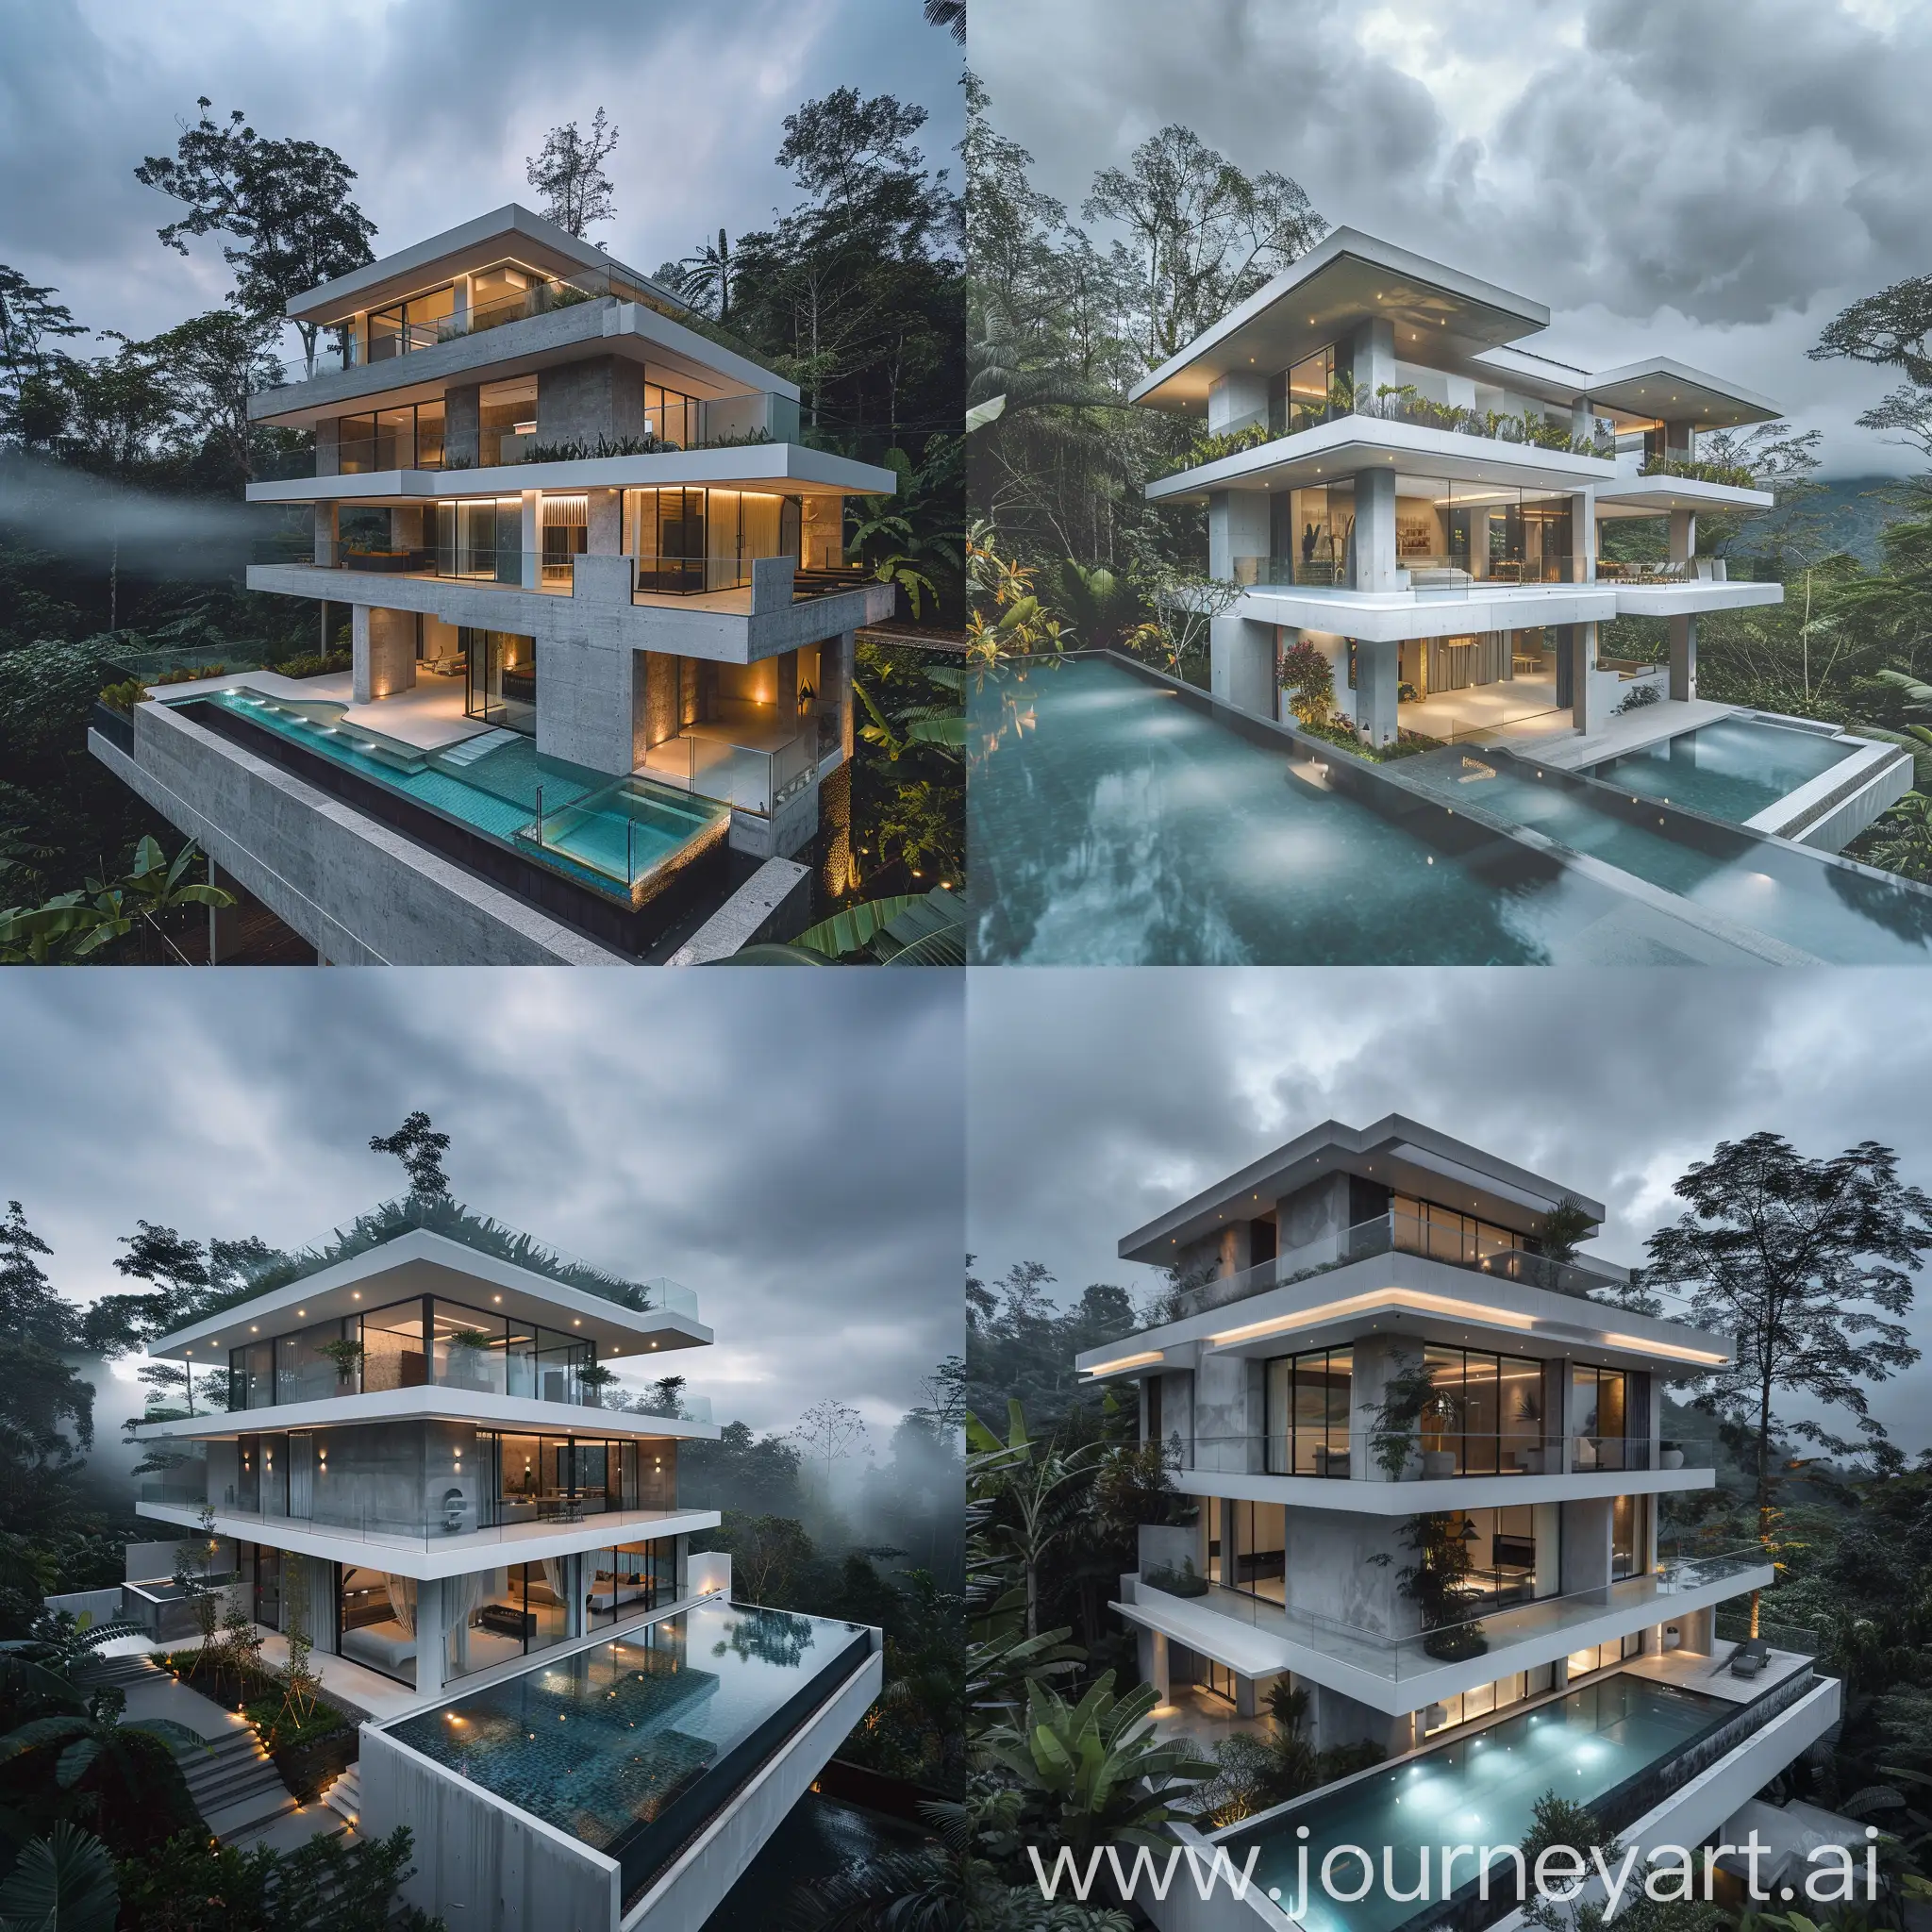 Luxurious-ThreeStory-Concrete-Villa-with-Infinity-Pool-in-Tropical-Forest